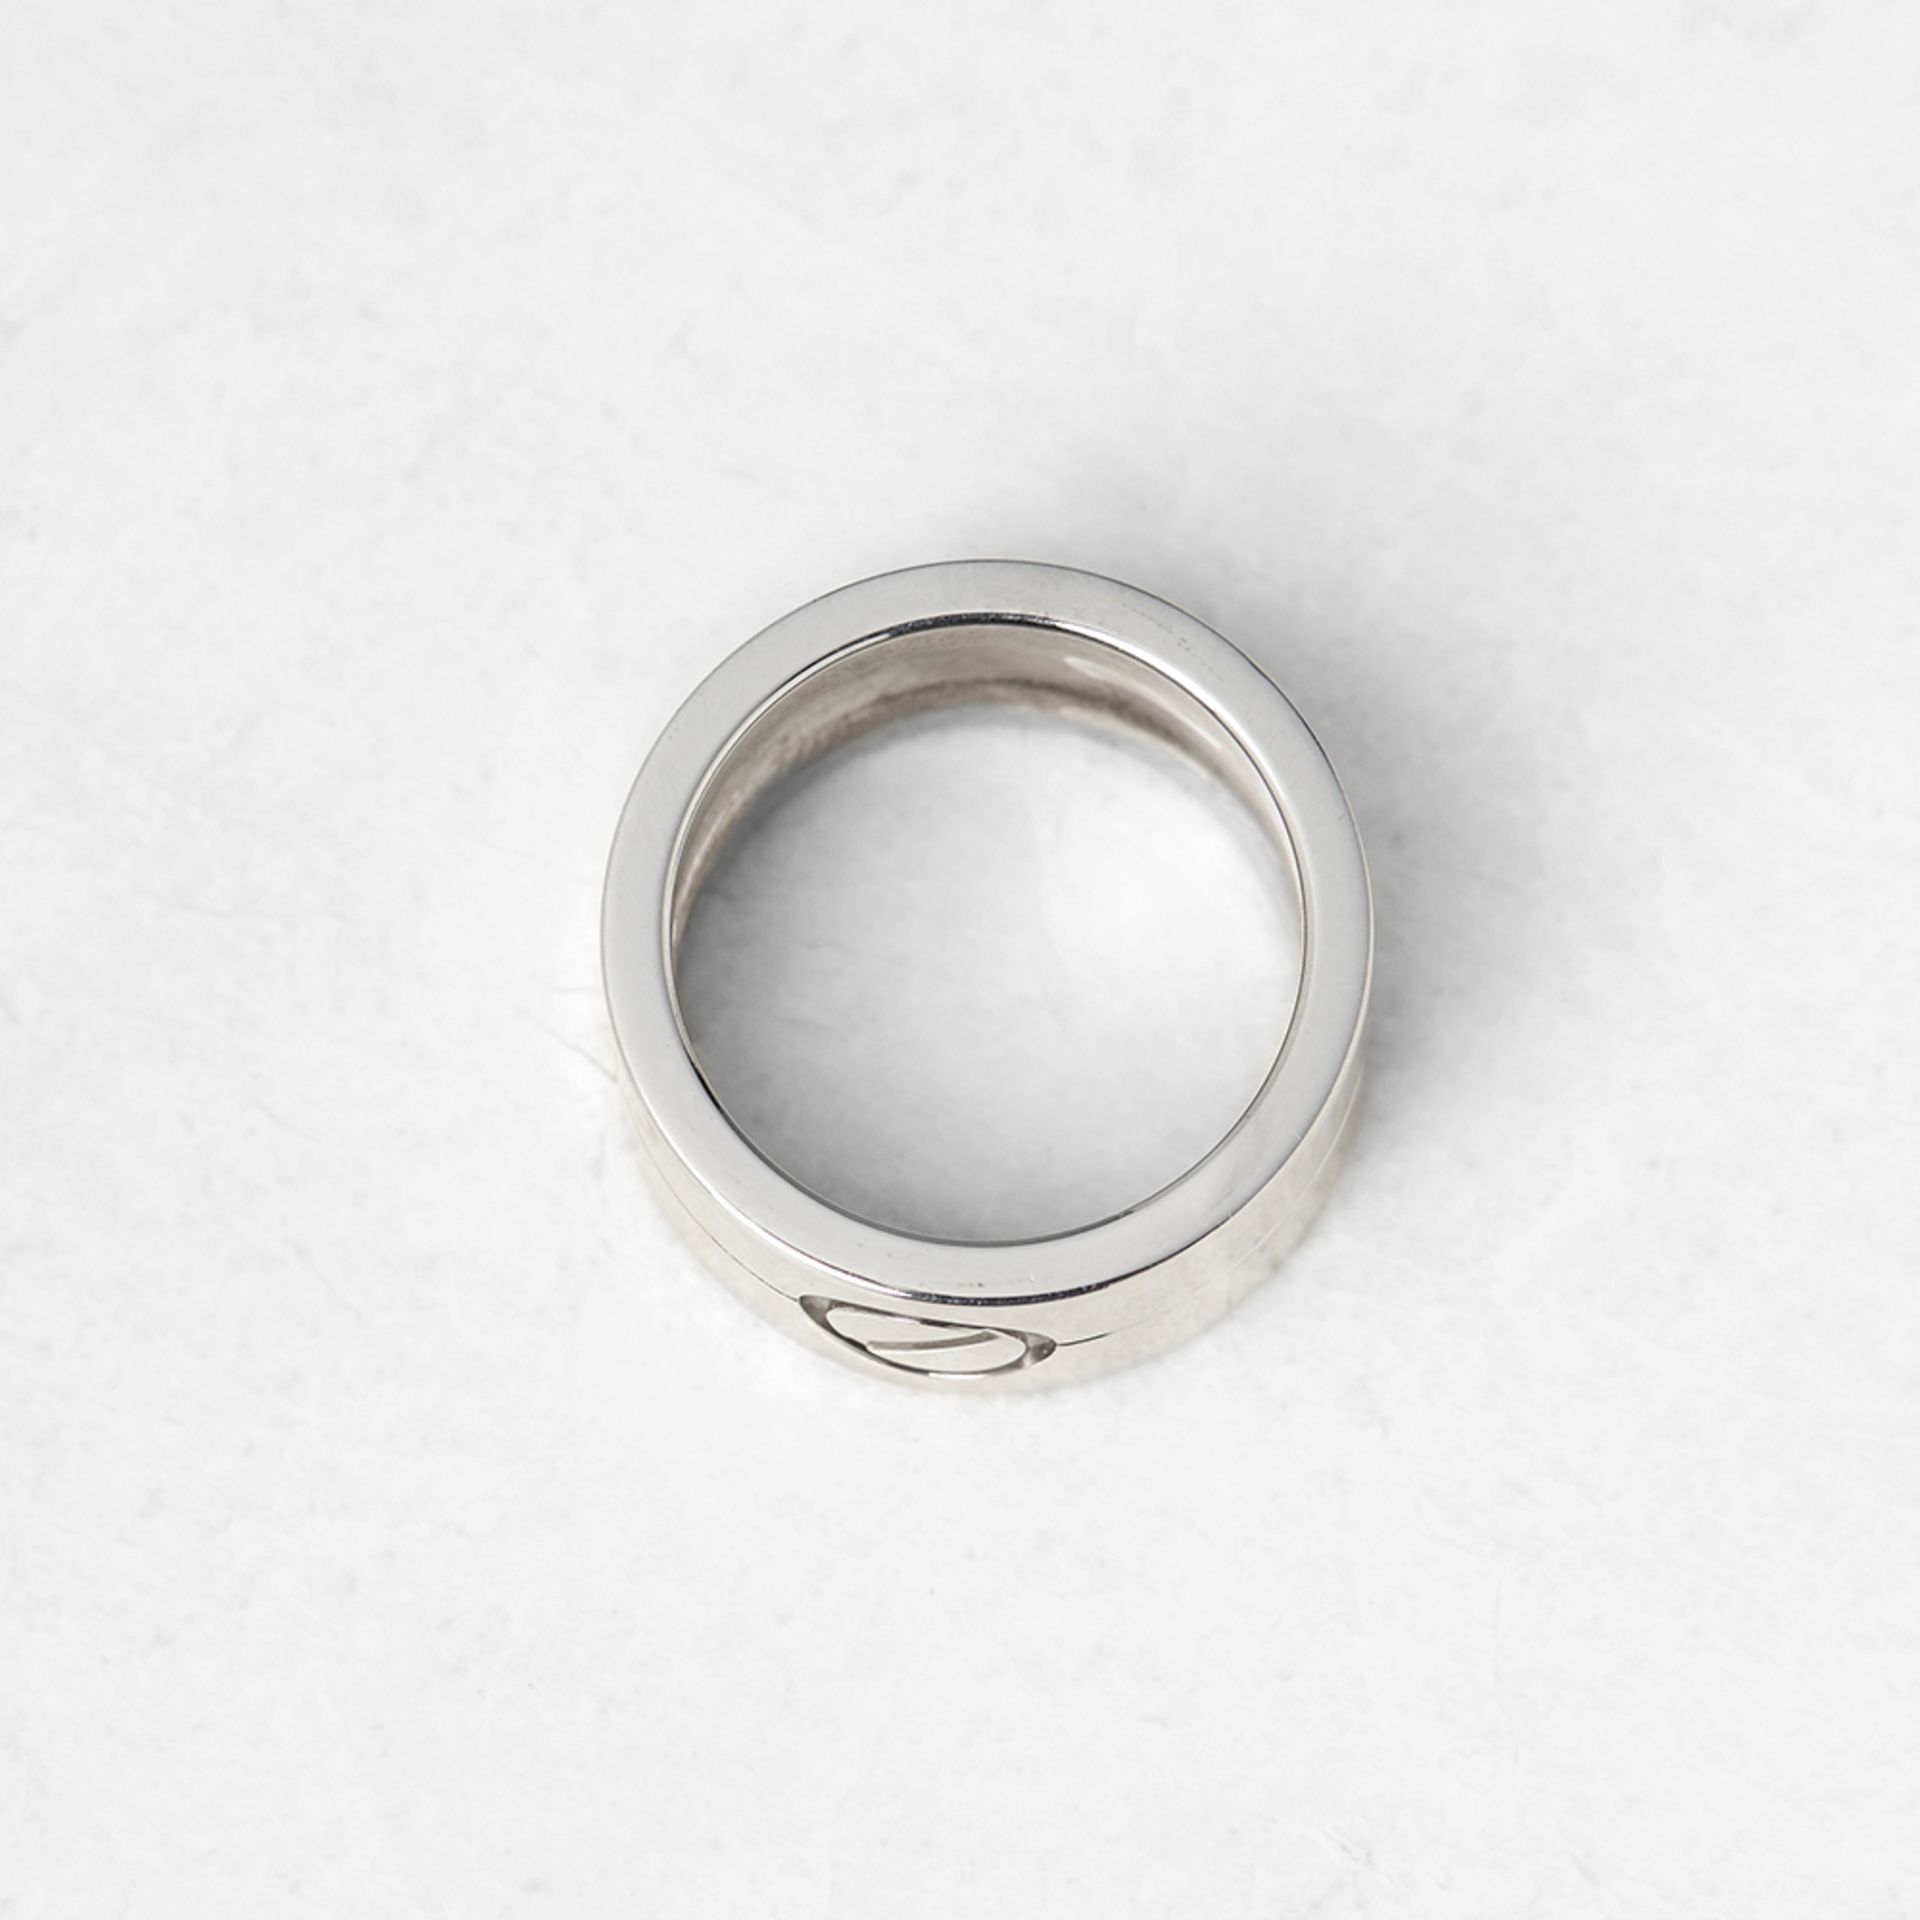 Cartier 18k White Gold High Love Ring - Image 4 of 7